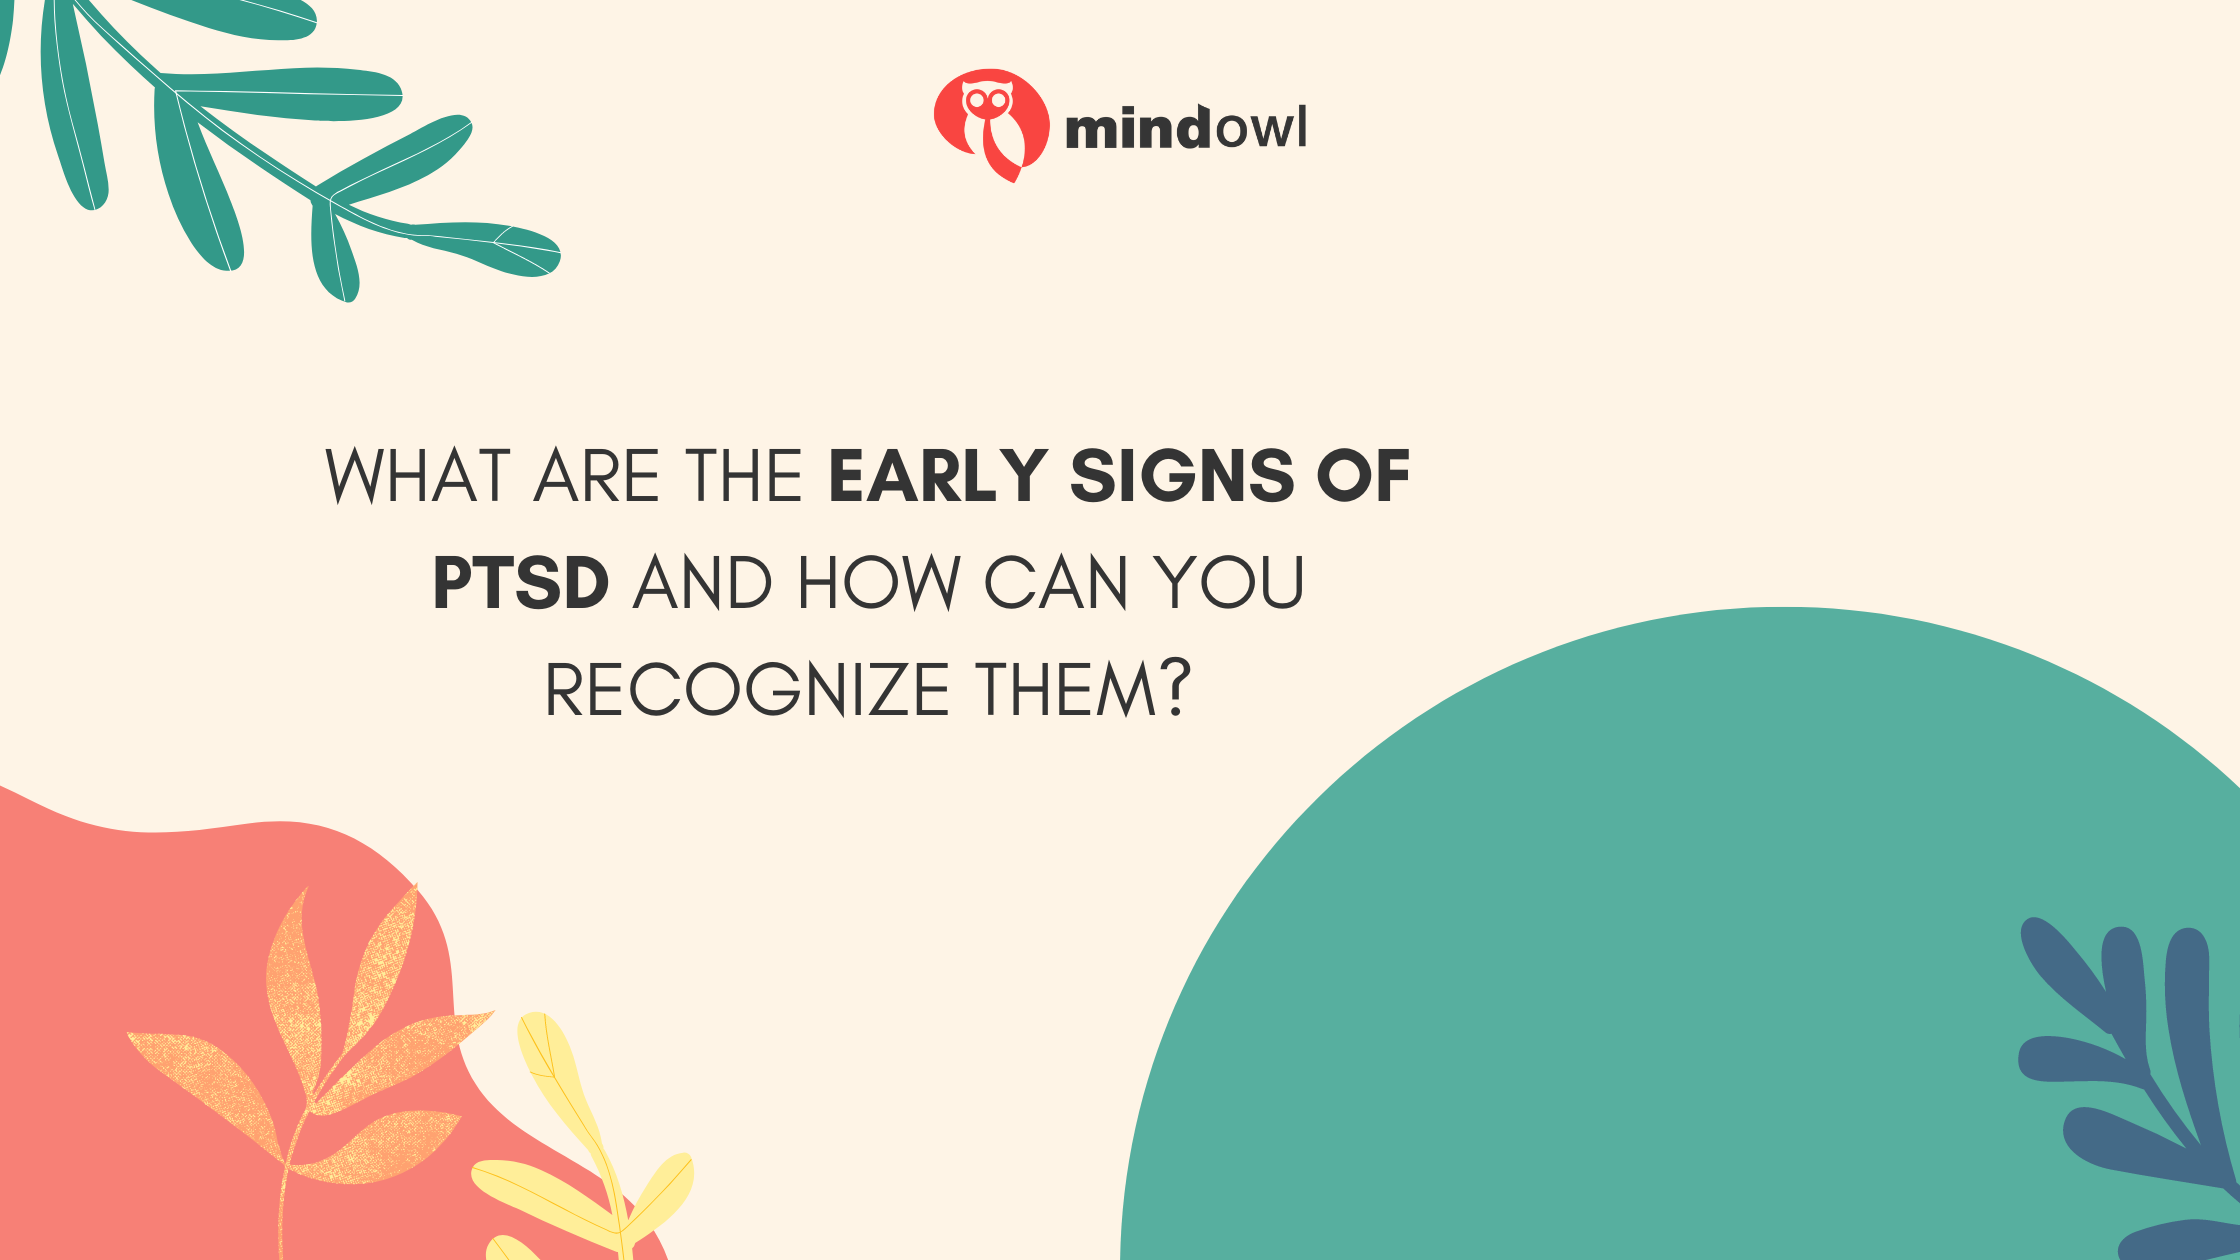 What Are the Early Signs of PTSD and How Can You Recognize Them?